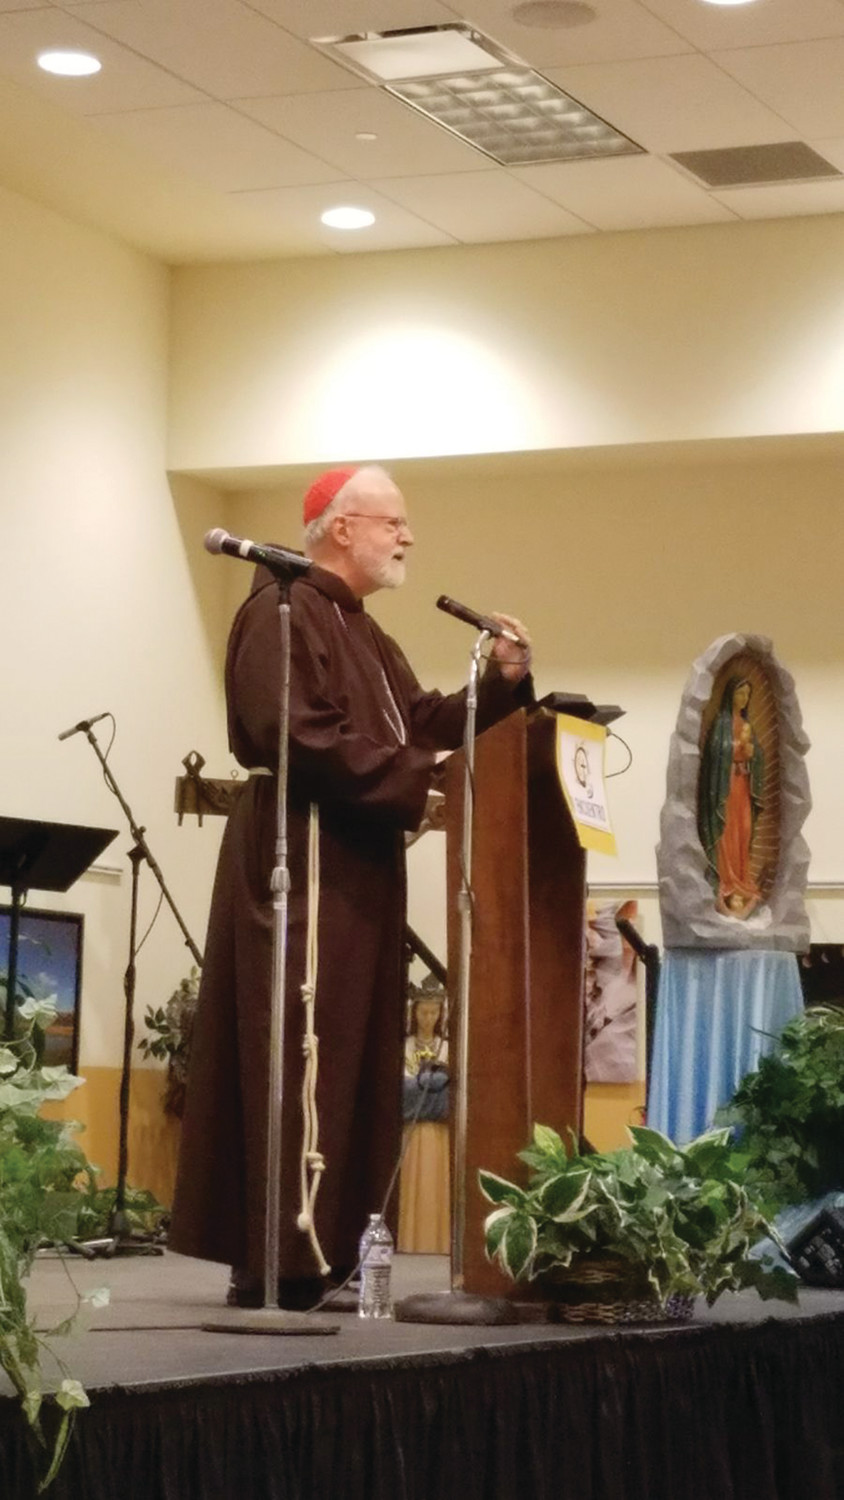 Cardinal Sean O’Malley, Archbishop of Boston, was the main speaker during the Region 1 Encuentro on March 10. More than 550 delegates from six New England dioceses participated in the historic regional gathering.